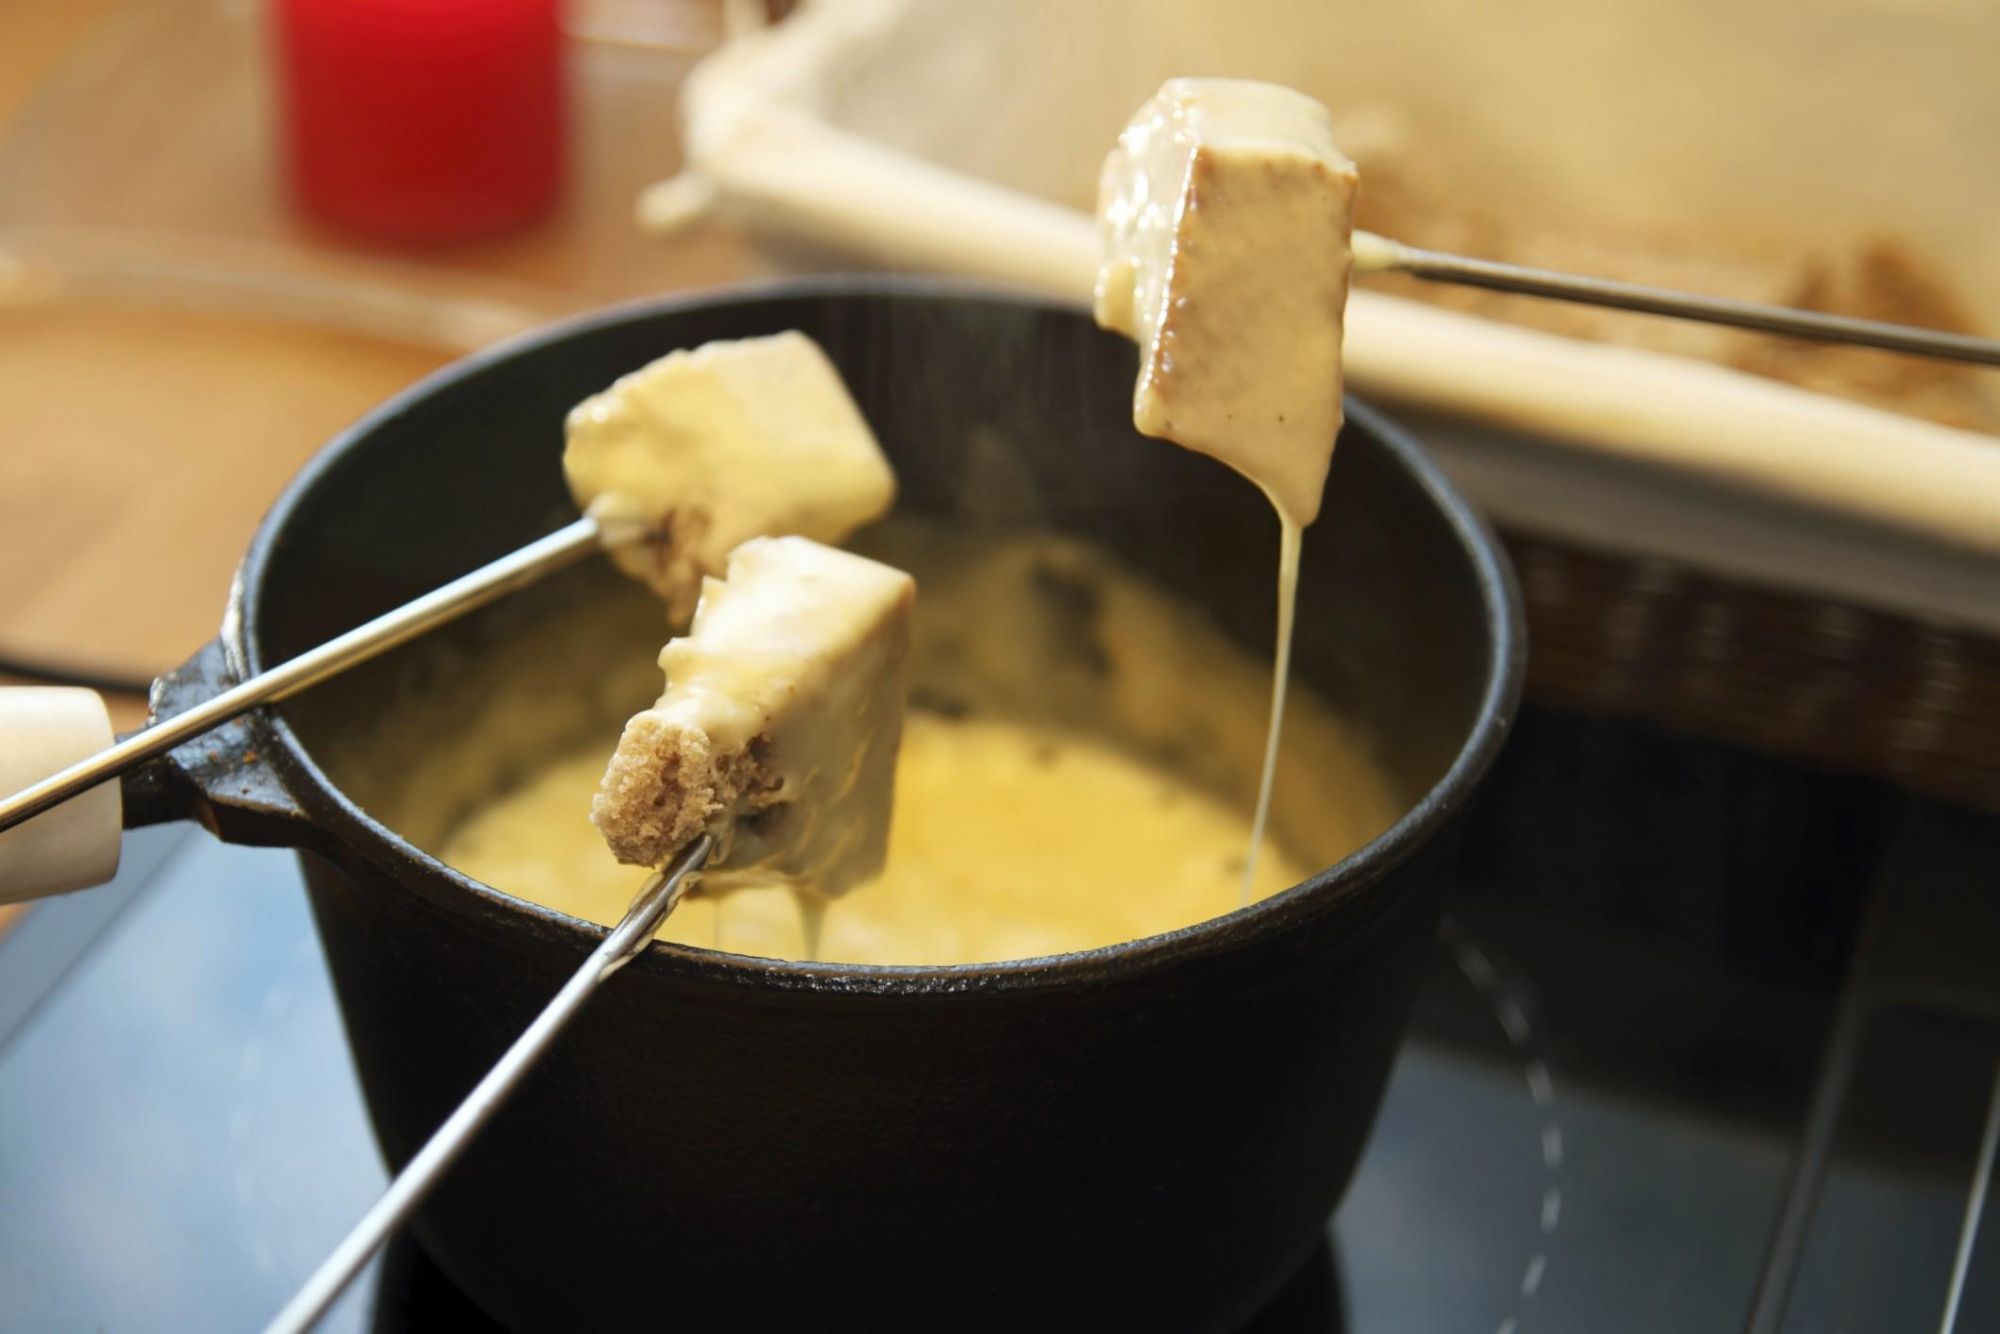 Cheese fondue recipes - Find the best rated recipes!